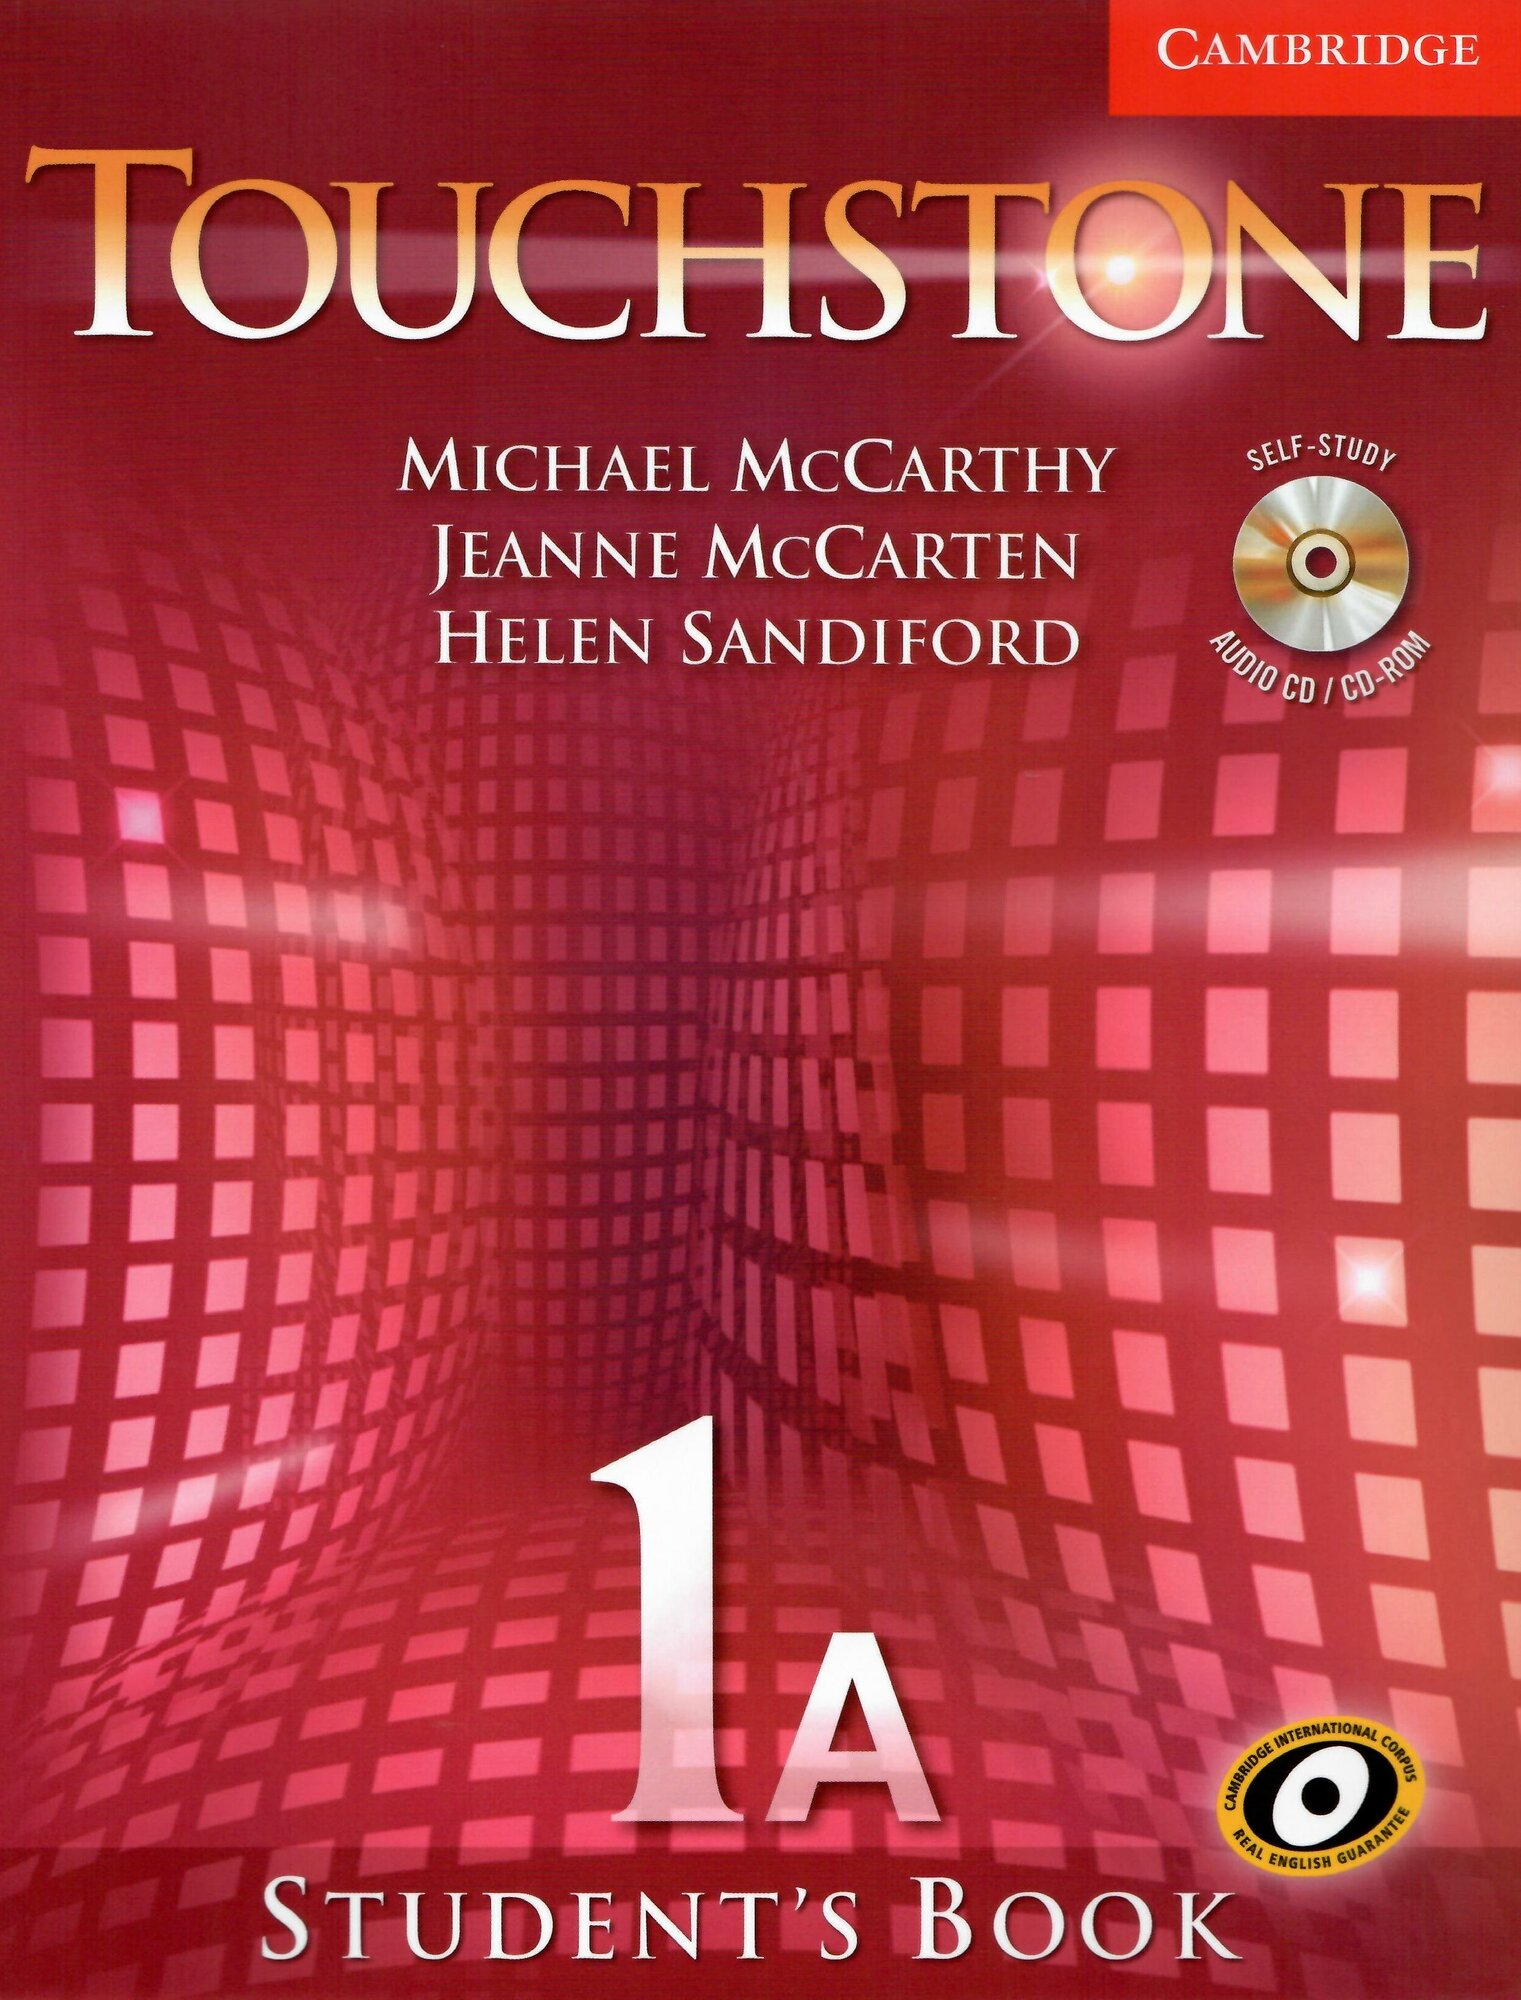 Touchstone 1 A Student's Book with Audio CD/CD-ROM